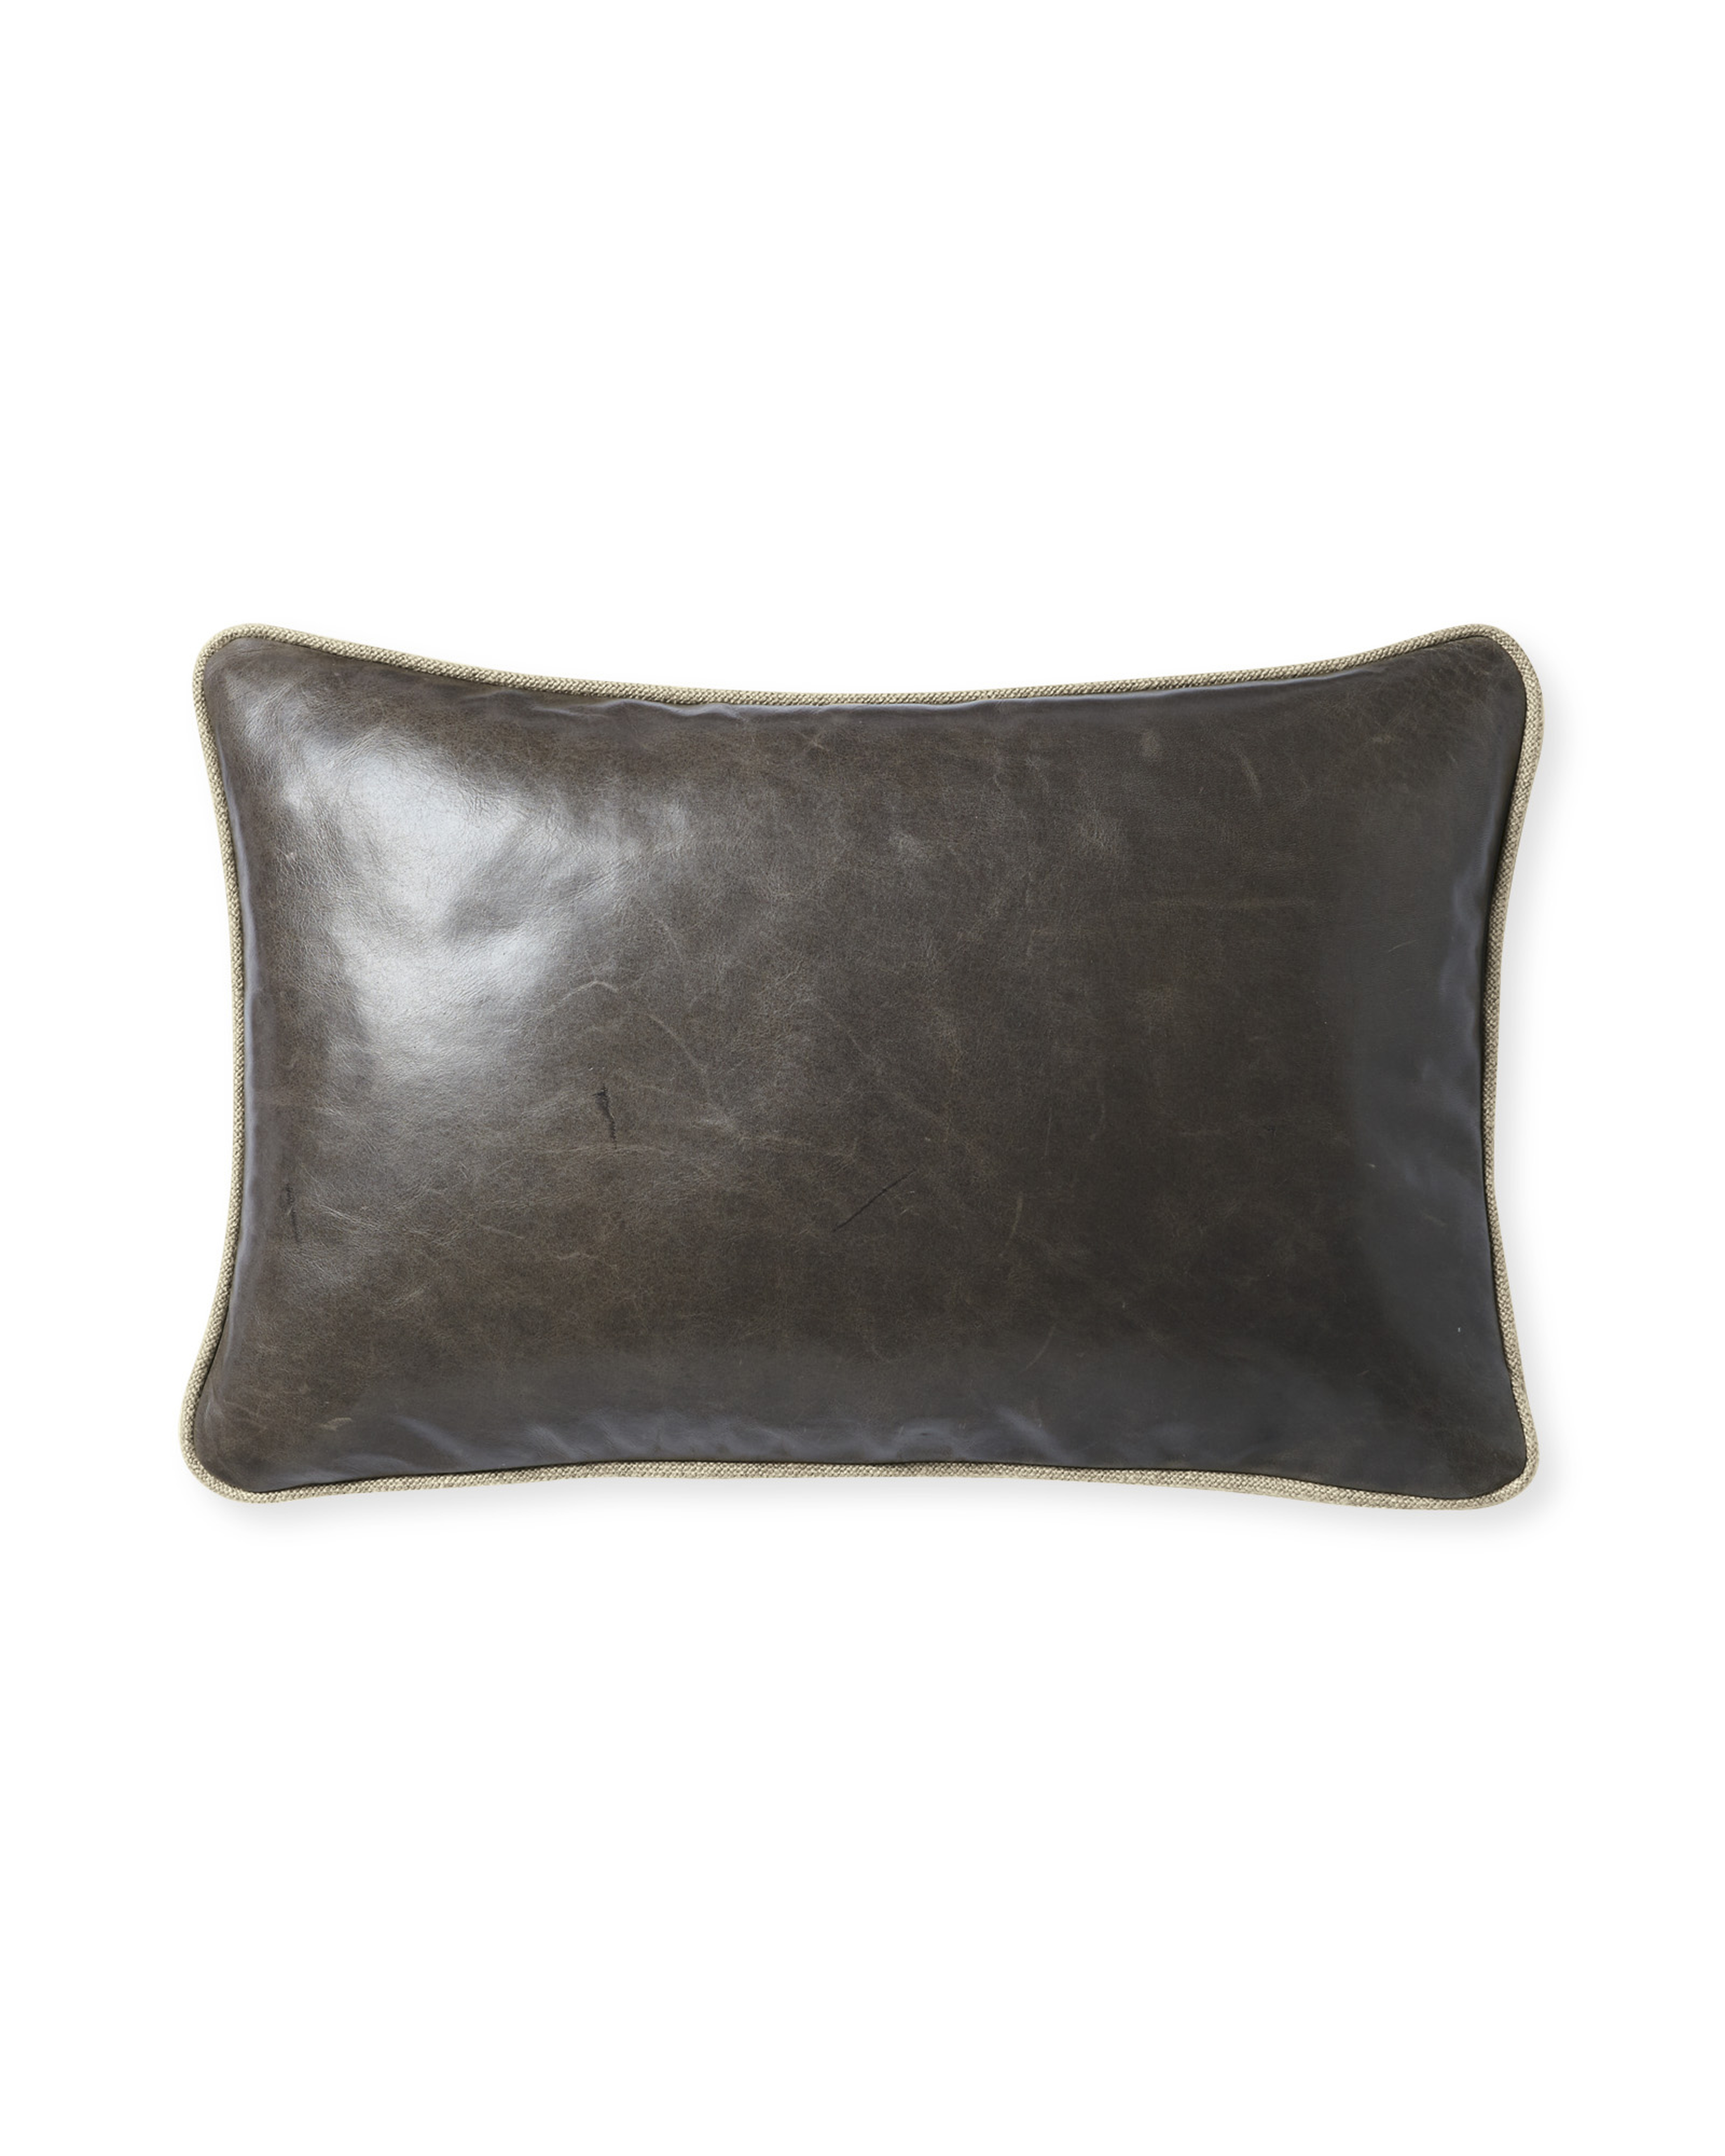 Leather 12" x 18" Pillow Cover - Pewter - Insert sold separately - Serena and Lily